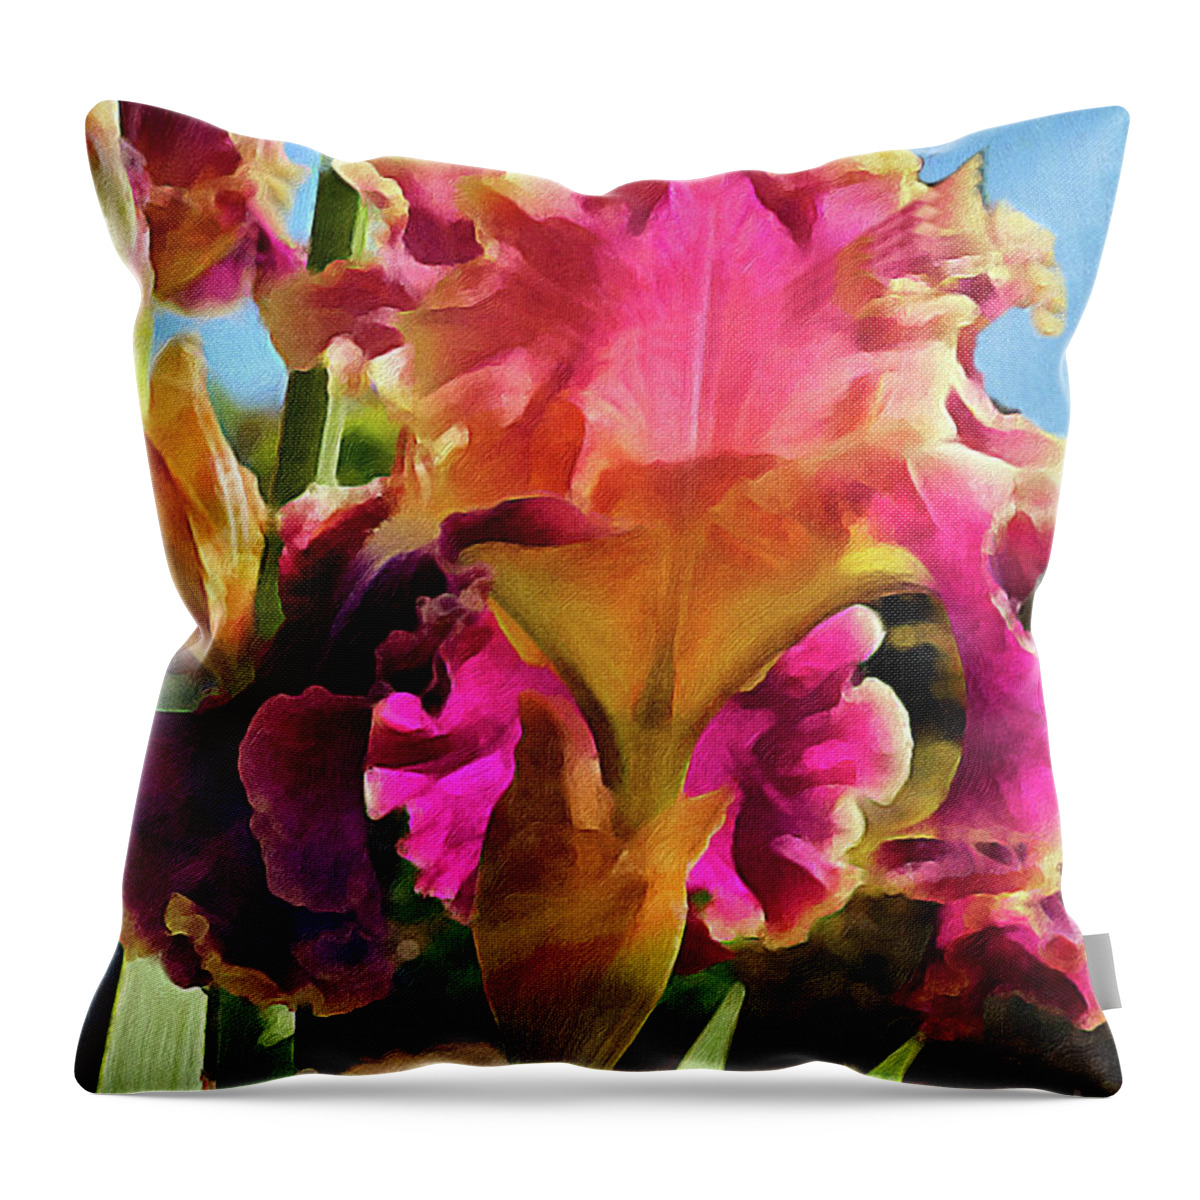 Iris Throw Pillow featuring the digital art Lovely Iris by Jeanette French